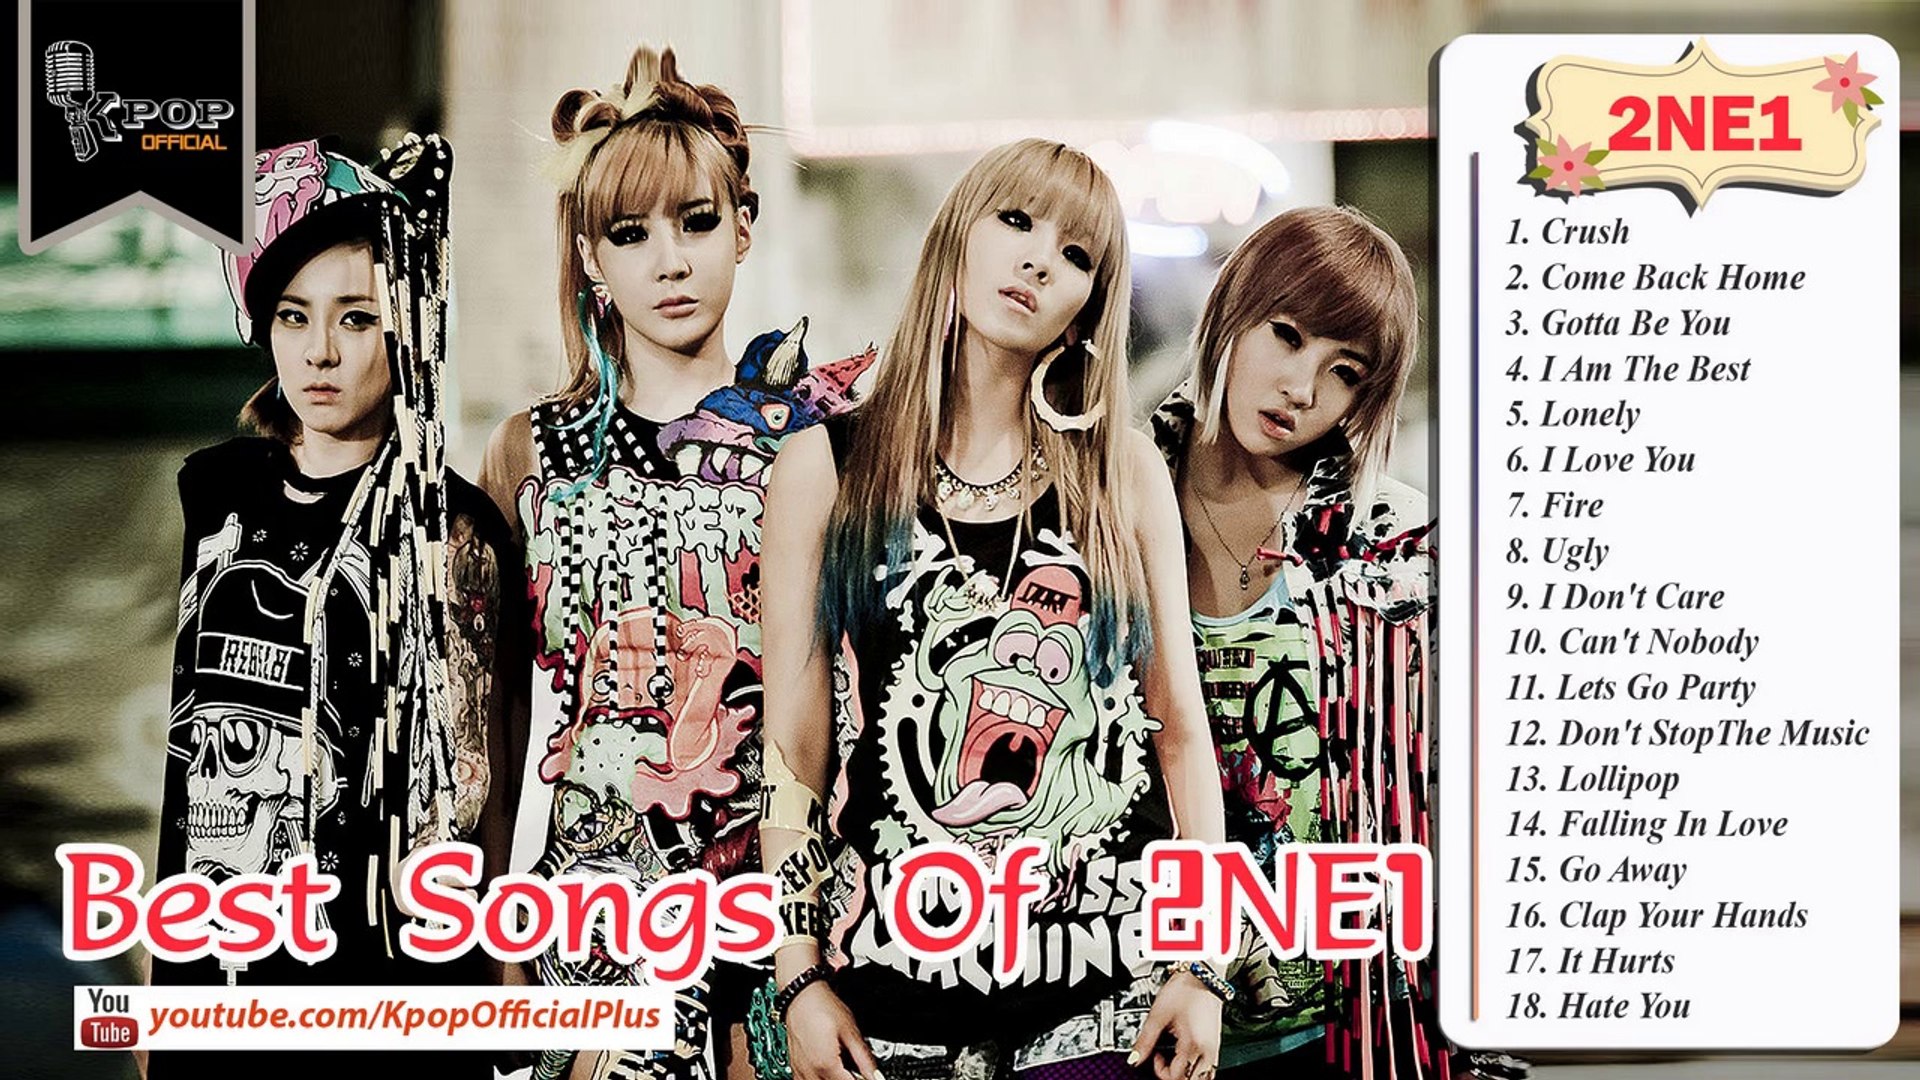 2ne1 Best Songs Of 2ne1 Collection 14 2ne1 S Greatest Hits Video Dailymotion